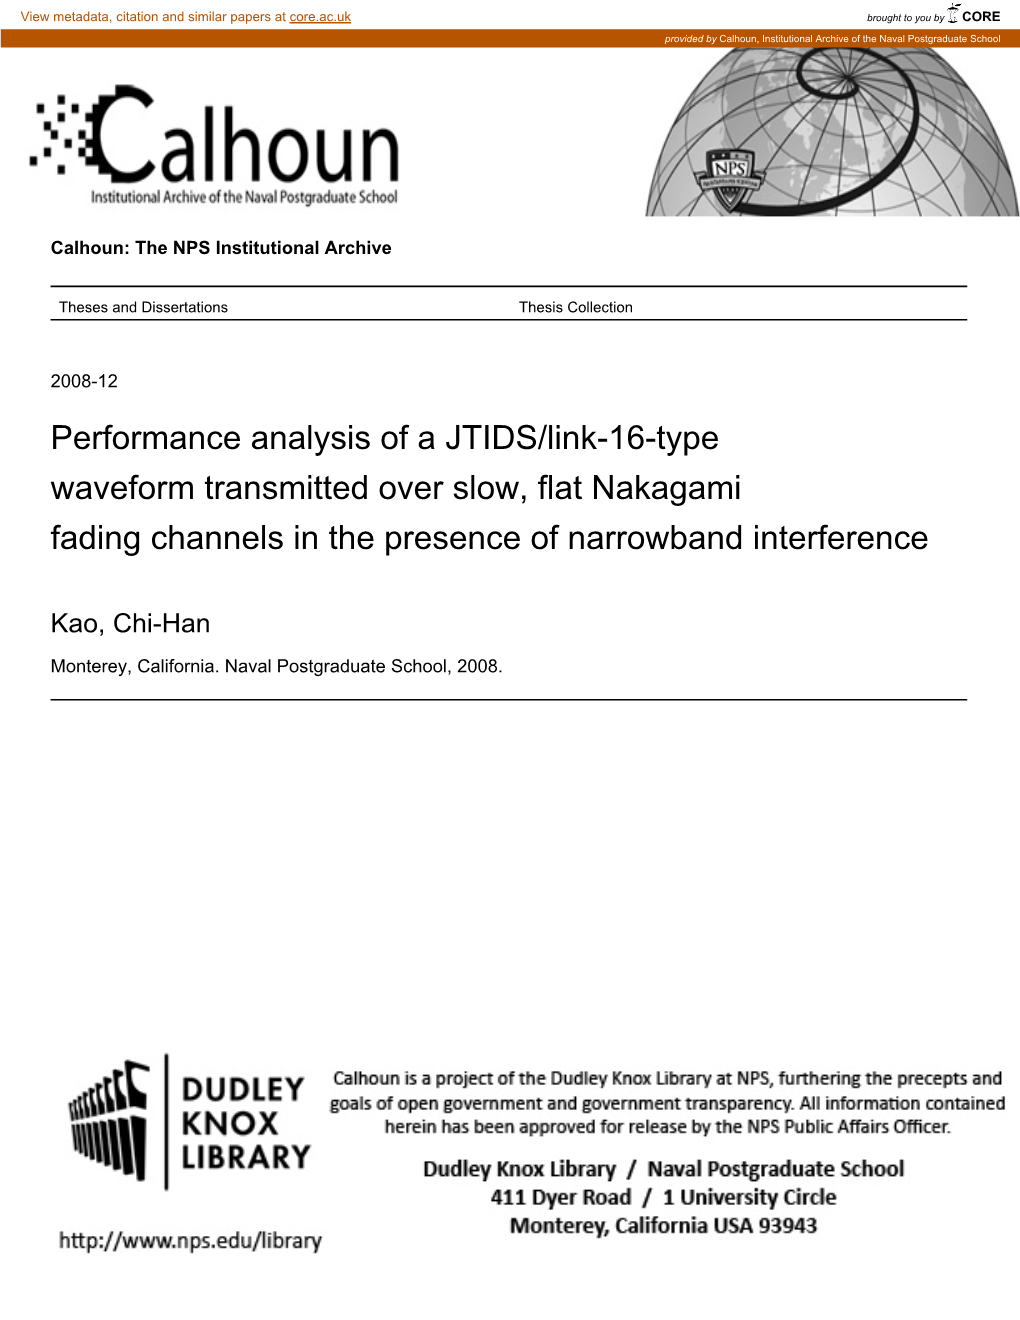 Performance Analysis of a JTIDS/Link-16-Type Waveform Transmitted Over Slow, Flat Nakagami Fading Channels in the Presence of Narrowband Interference